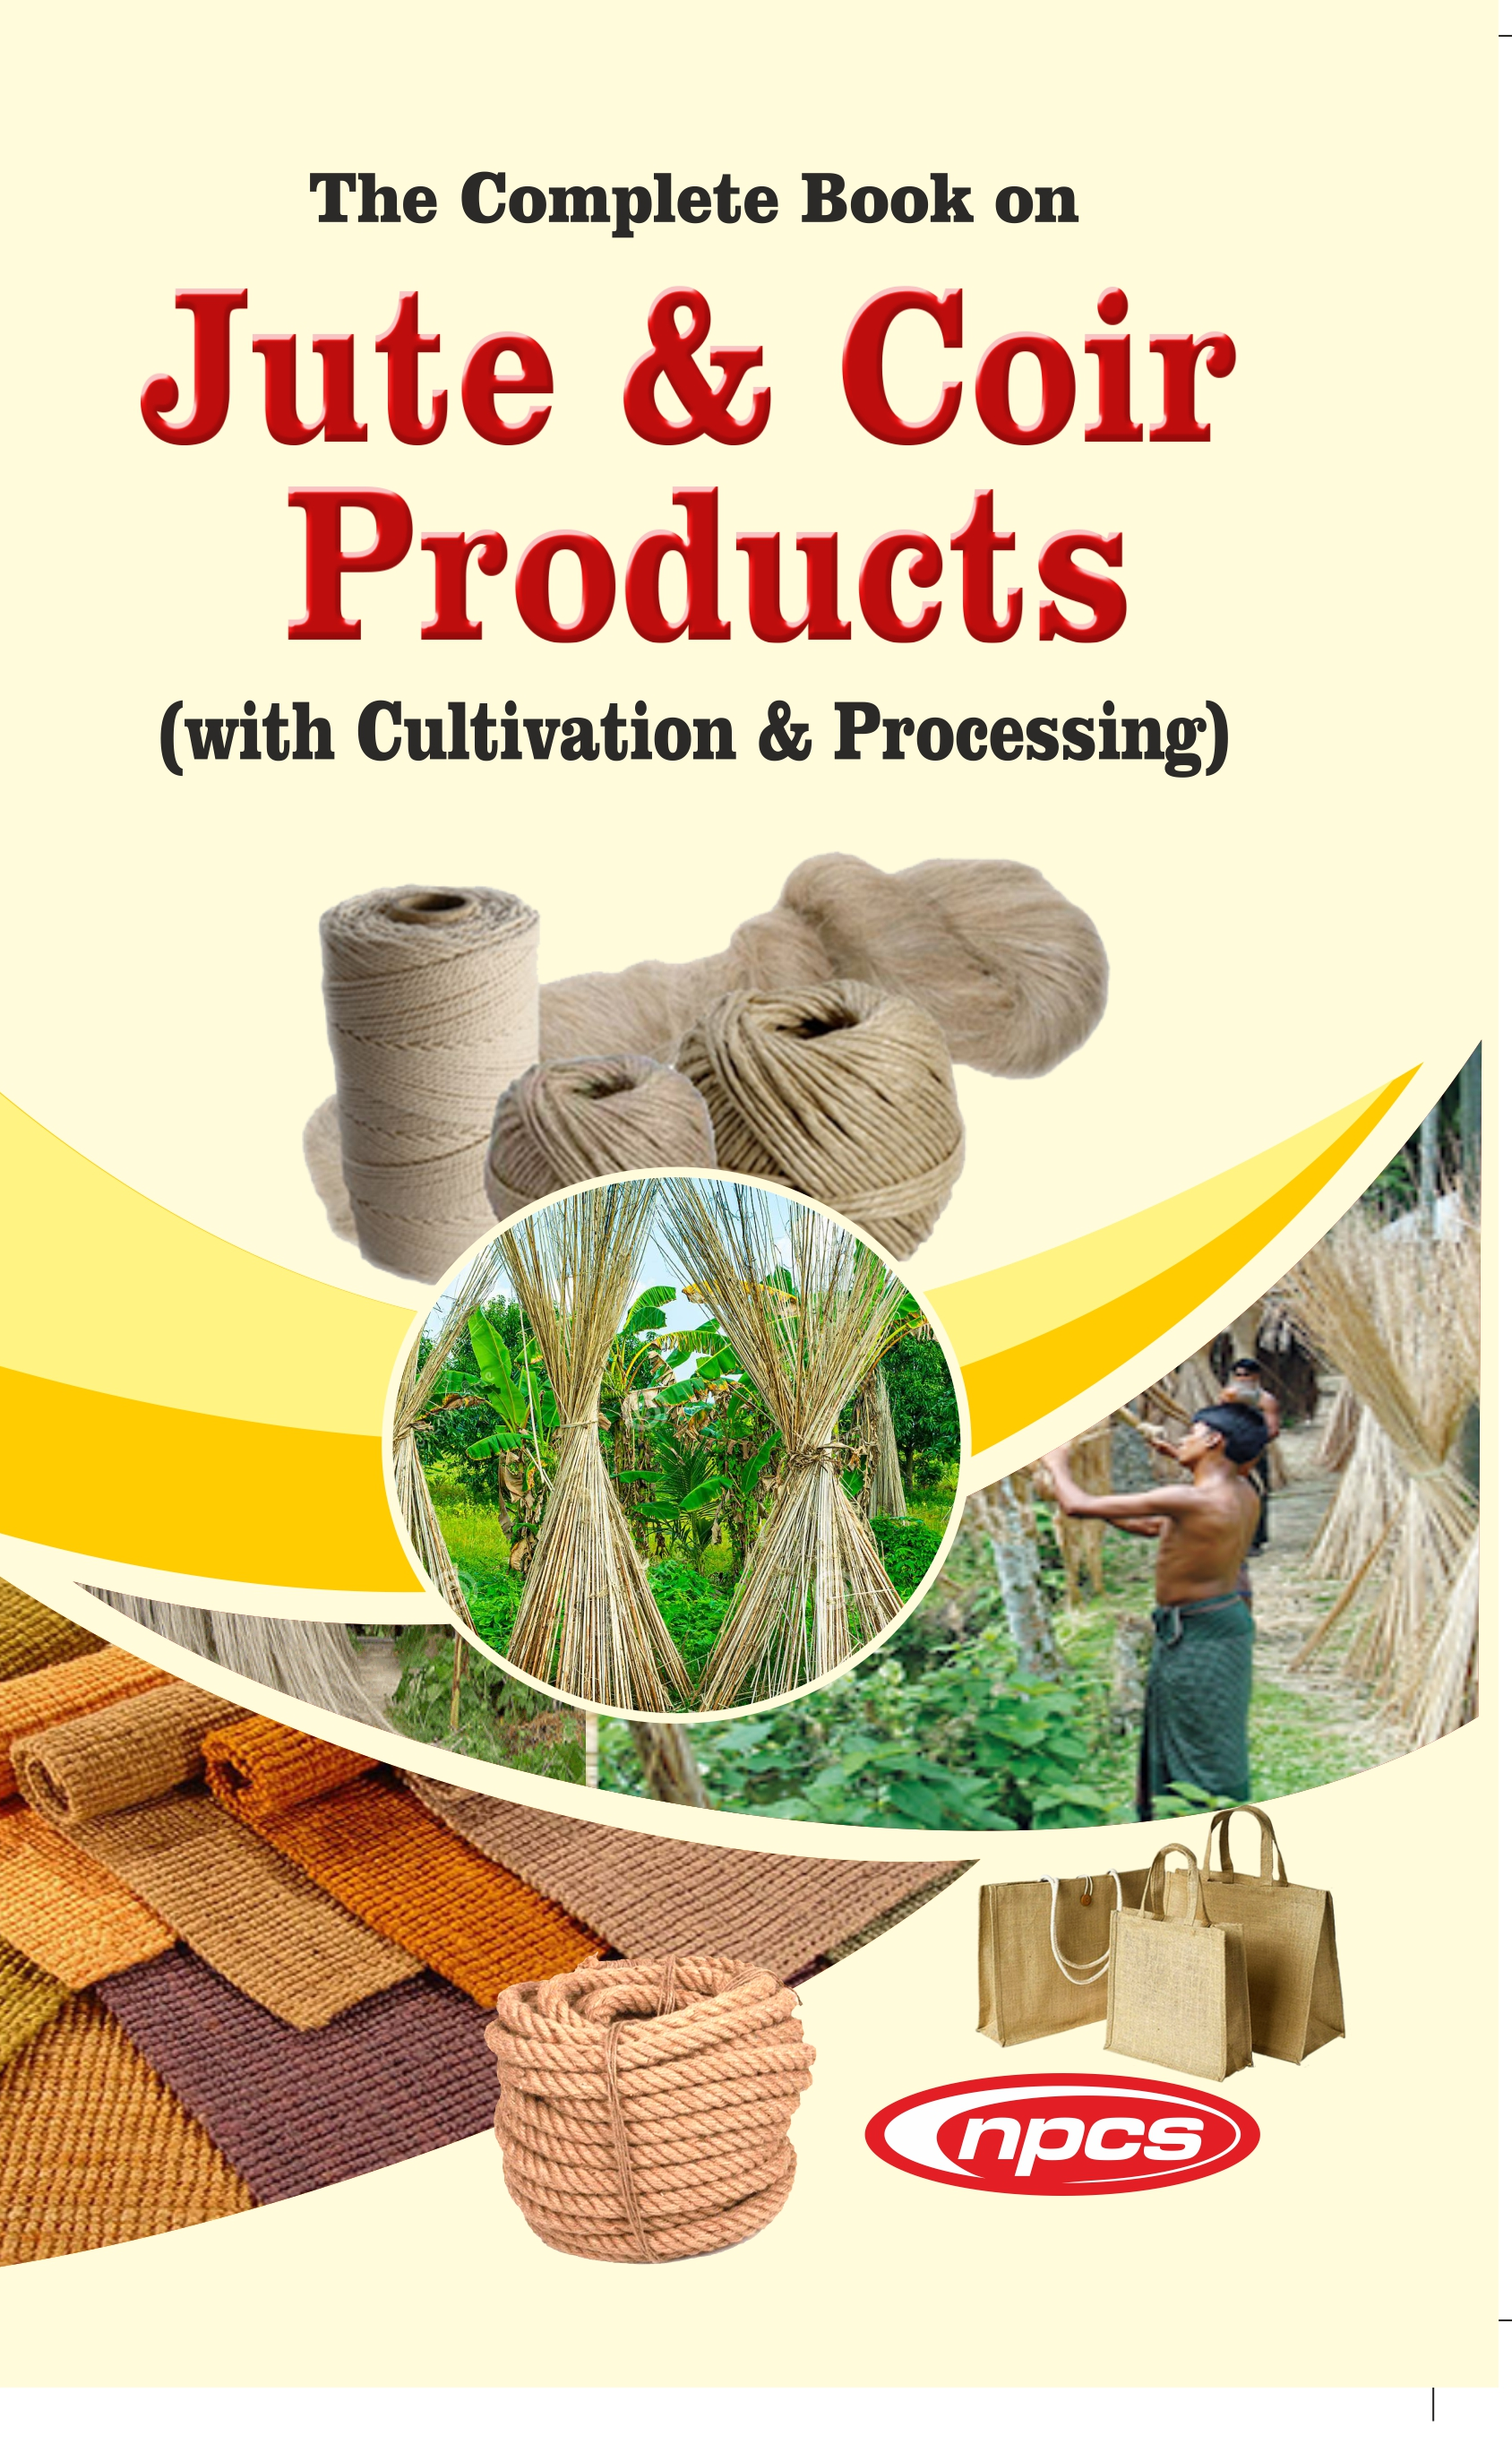 The Complete Book on Jute & Coir Products (with Cultivation & Processing) - 2nd Revised Edition